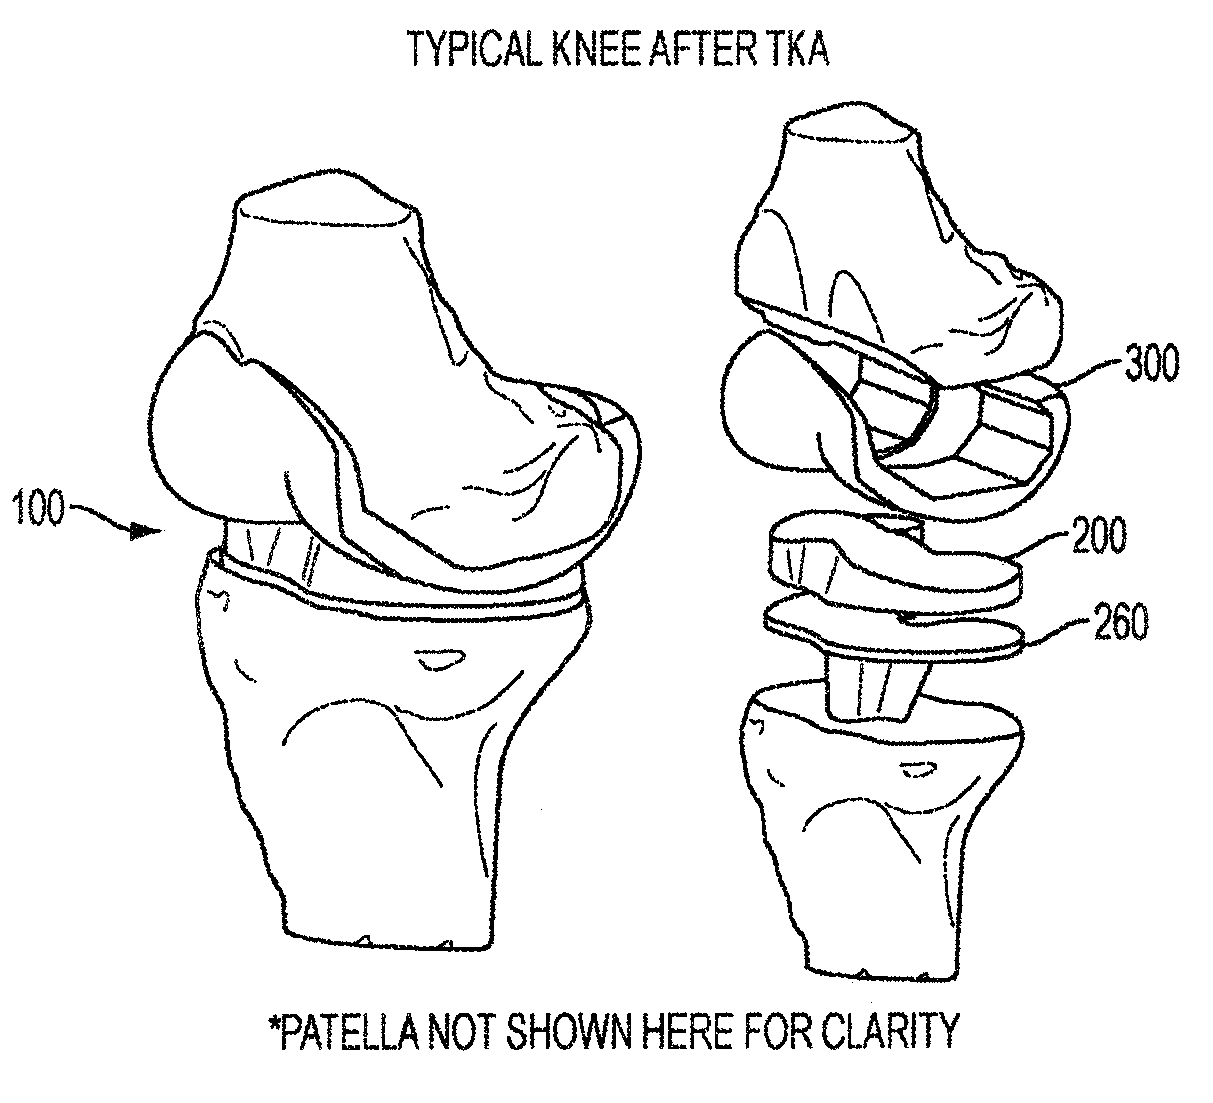 Implant for restoring normal range flexion and kinematics of the knee